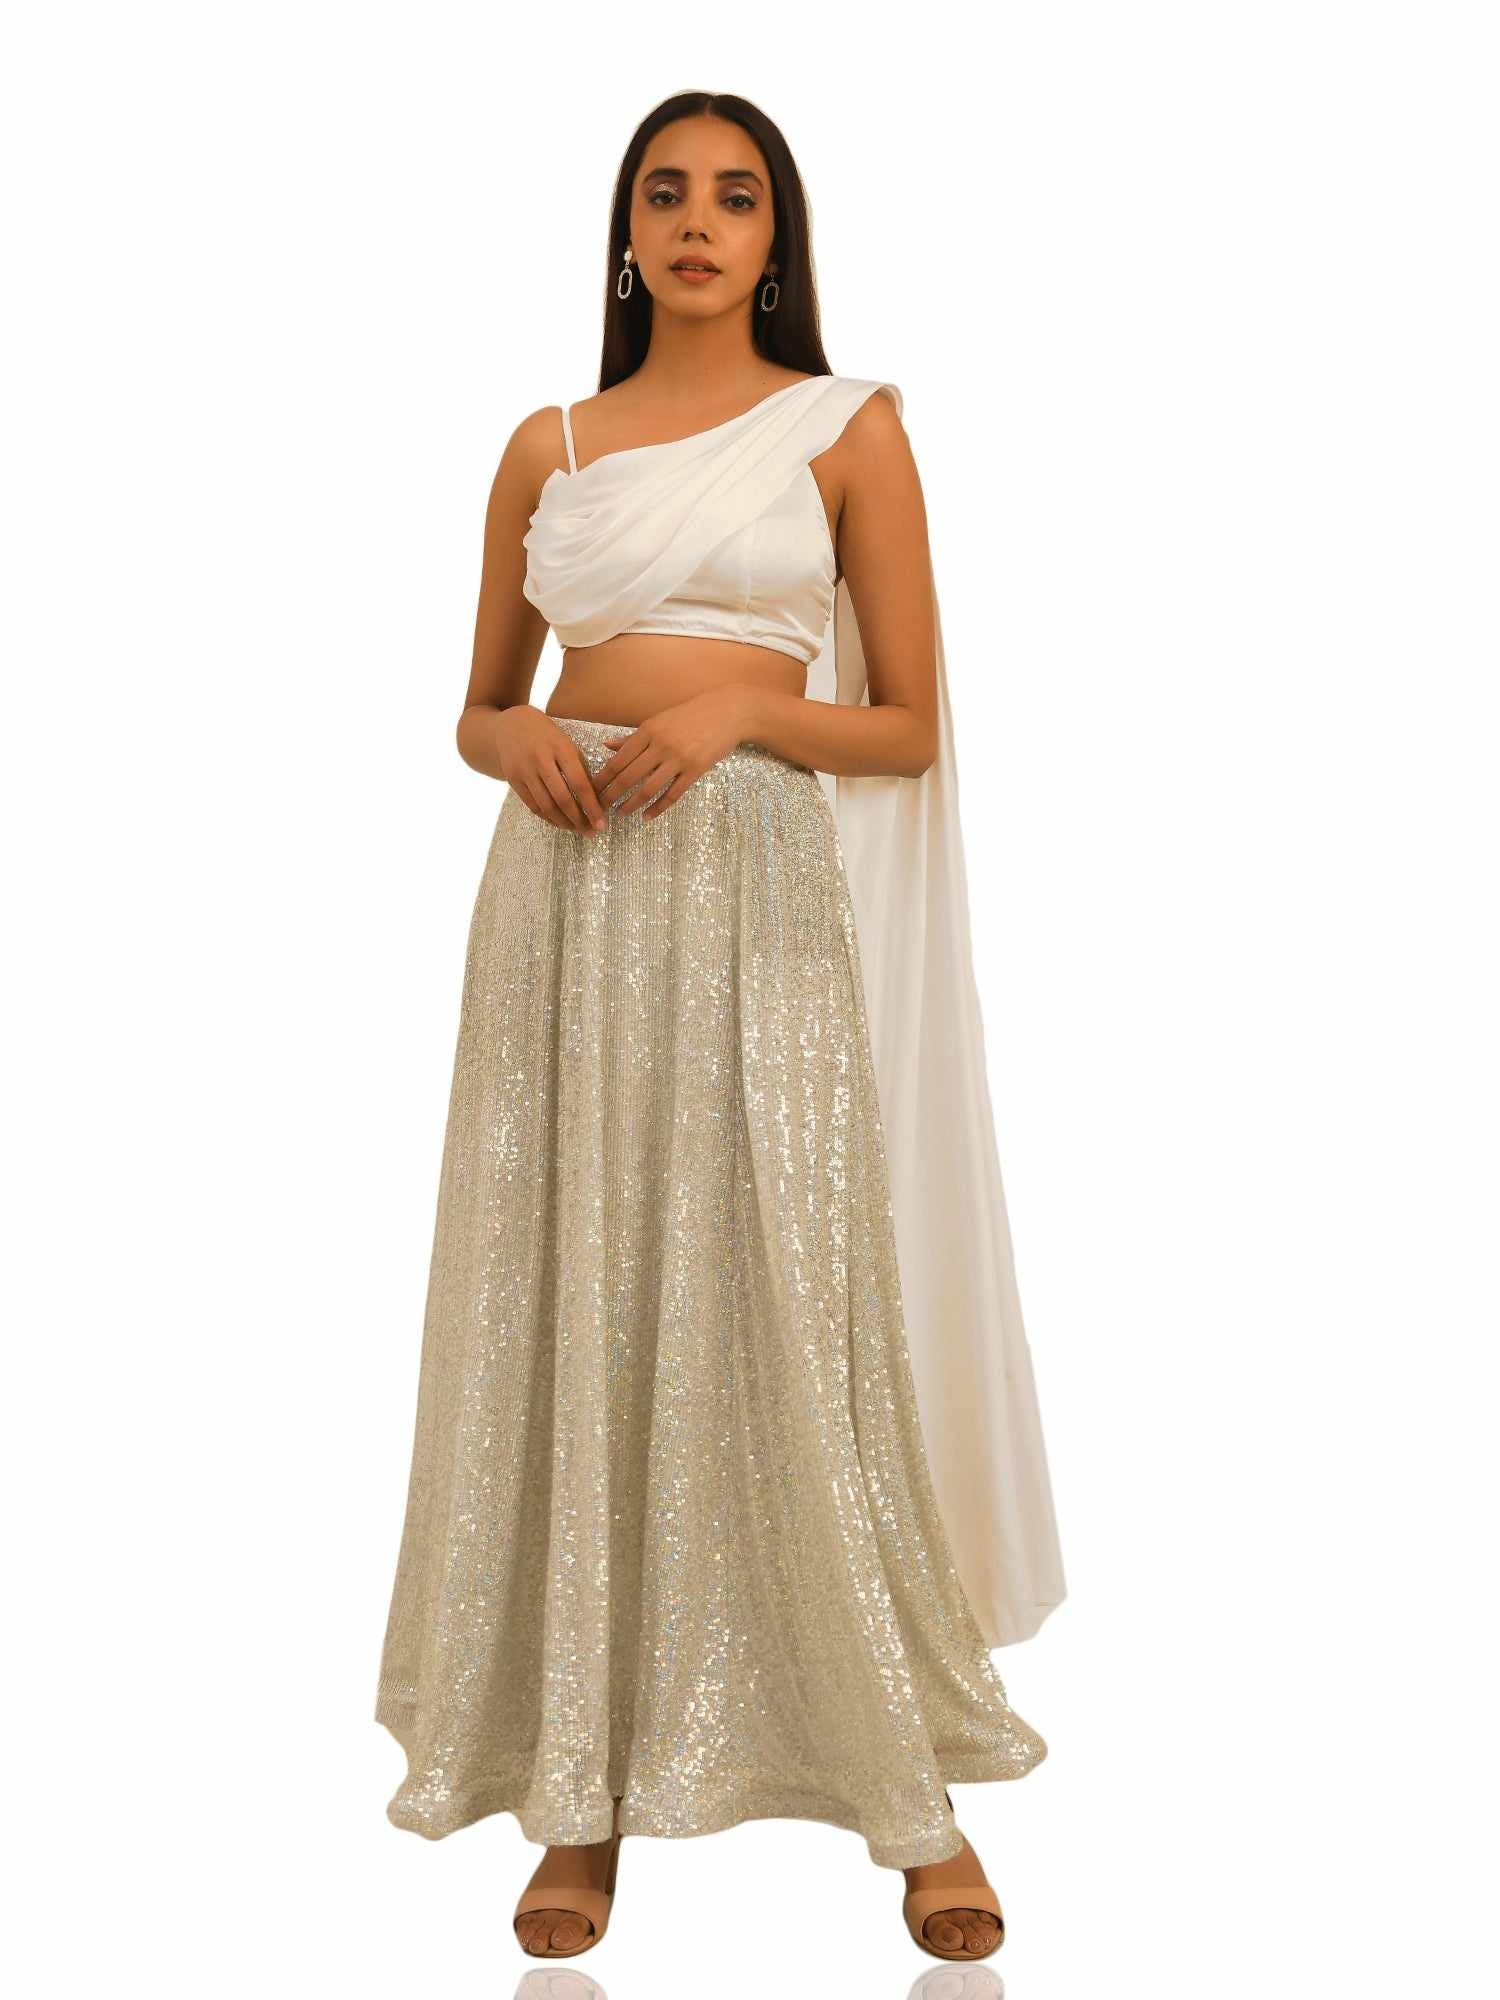 pearl white sequins skirt with satin top